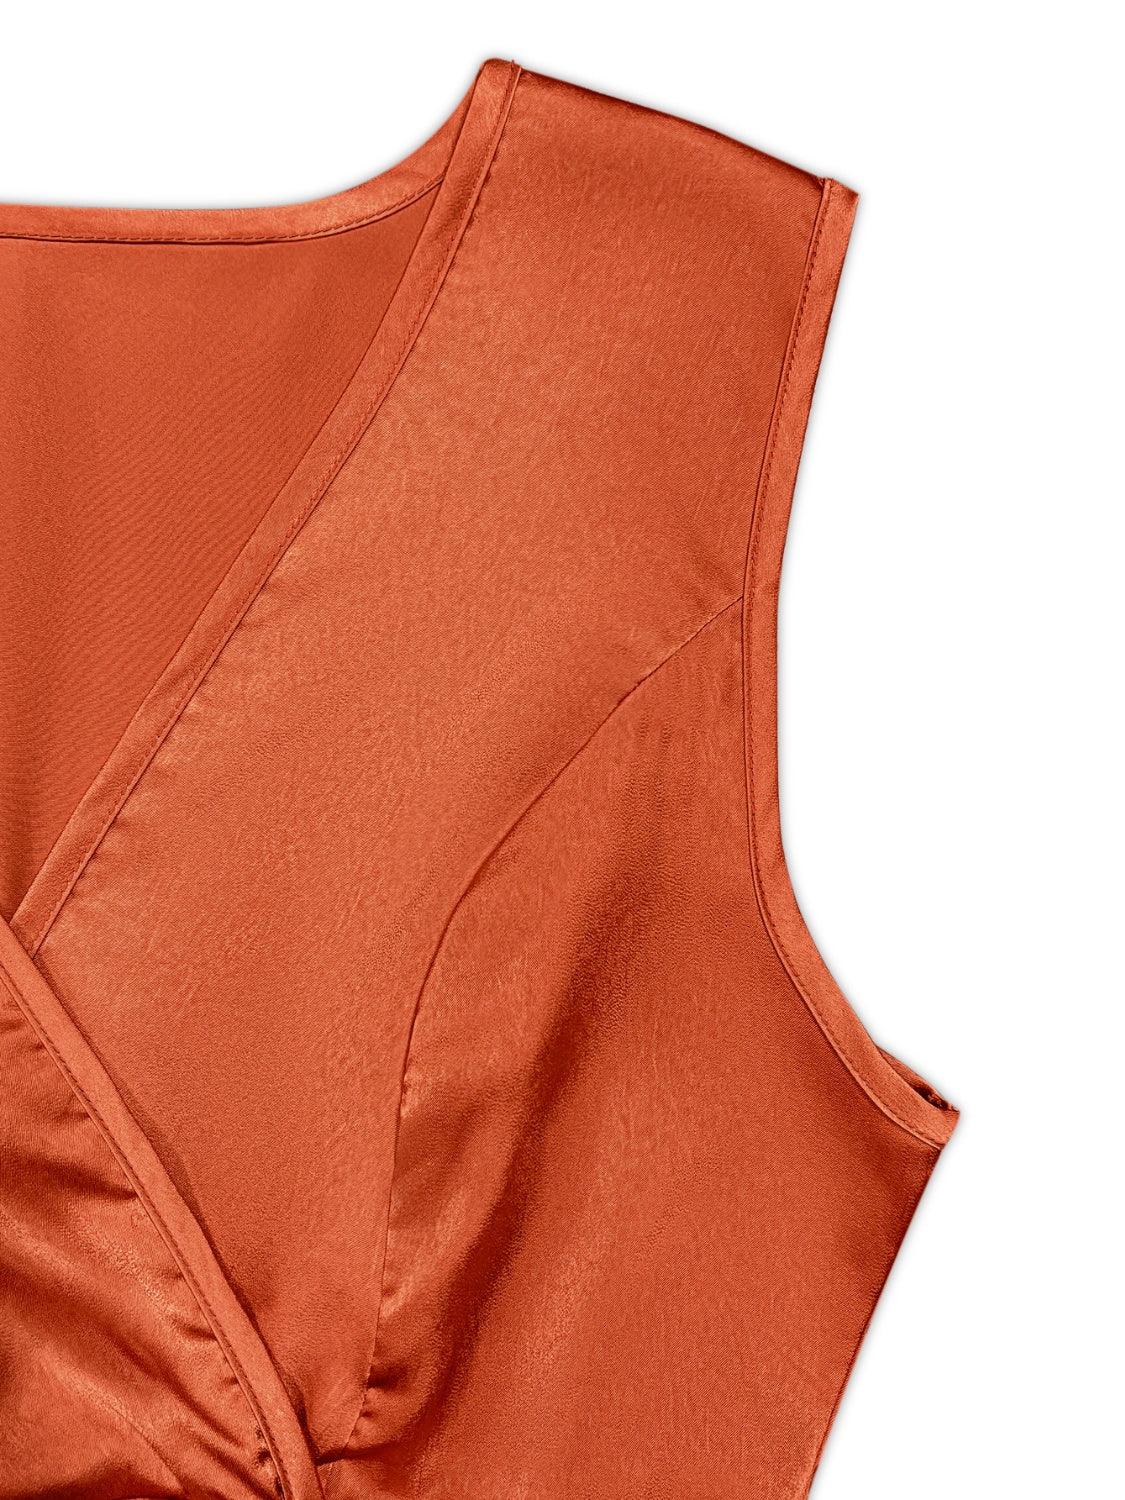 an orange top with a knot on the front